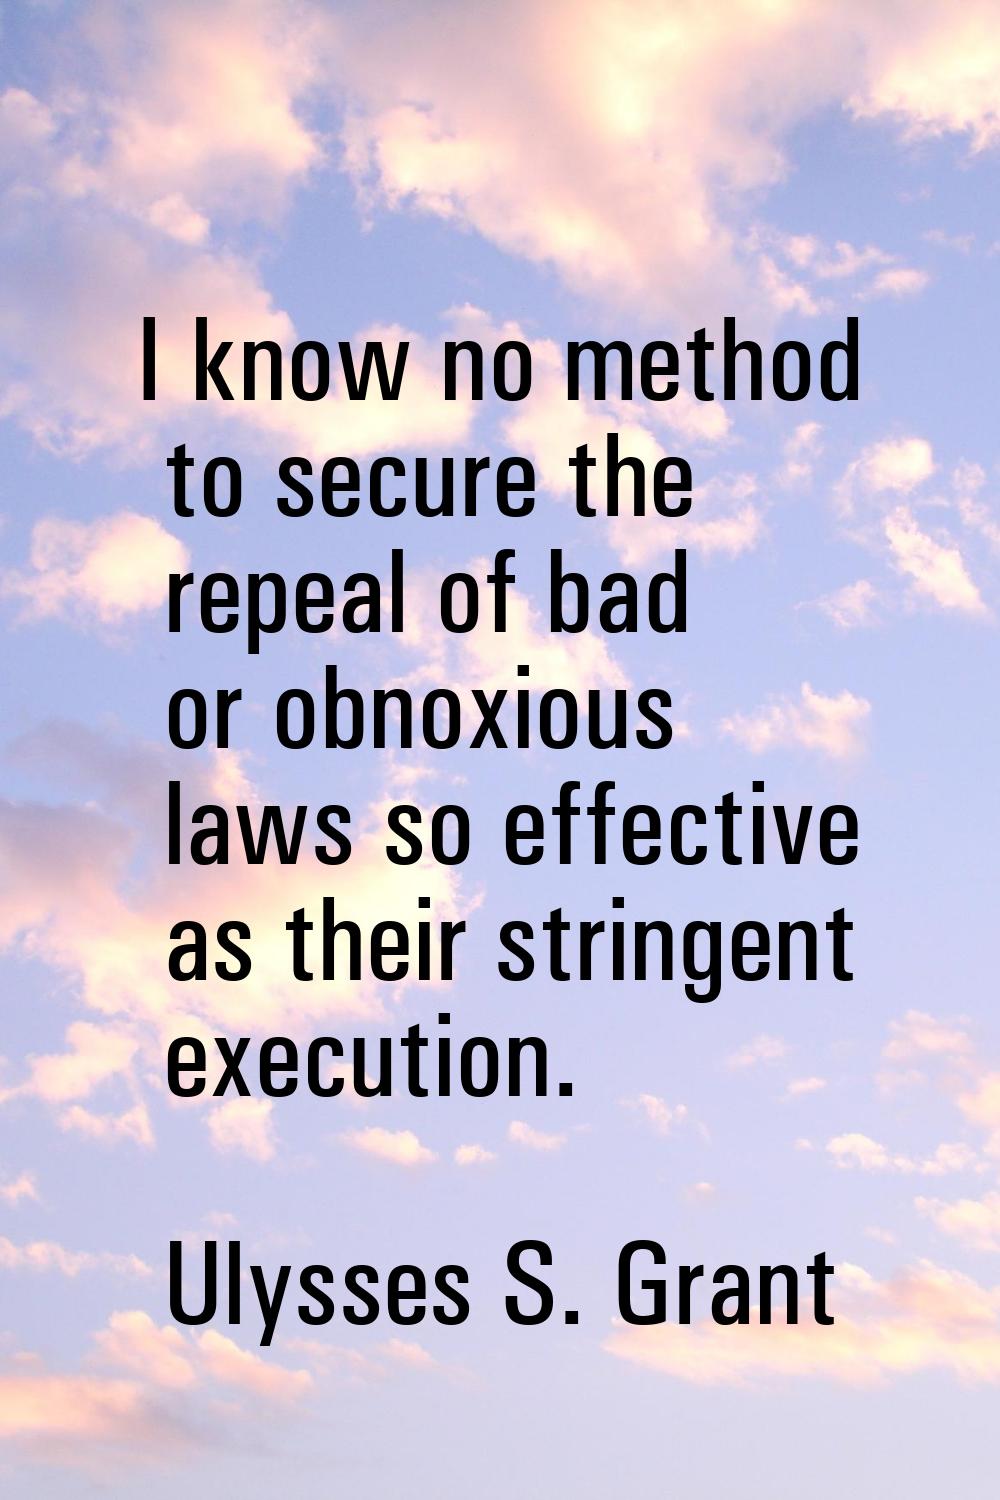 I know no method to secure the repeal of bad or obnoxious laws so effective as their stringent exec